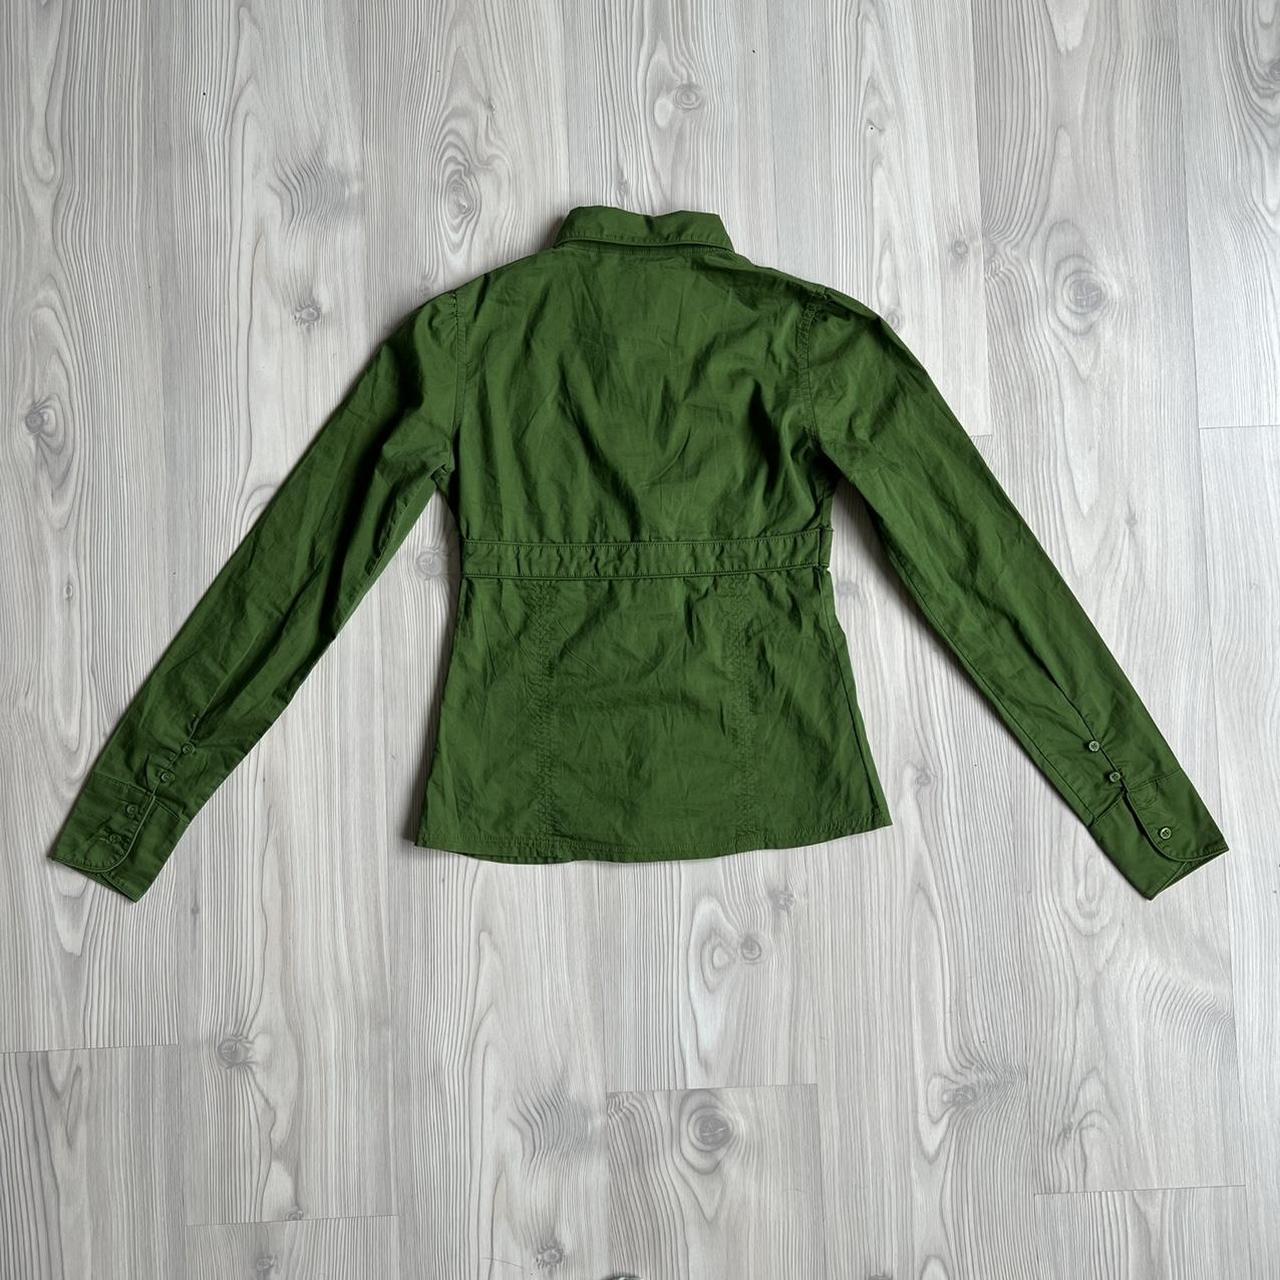 Product Image 3 - insane y2k green shirt with